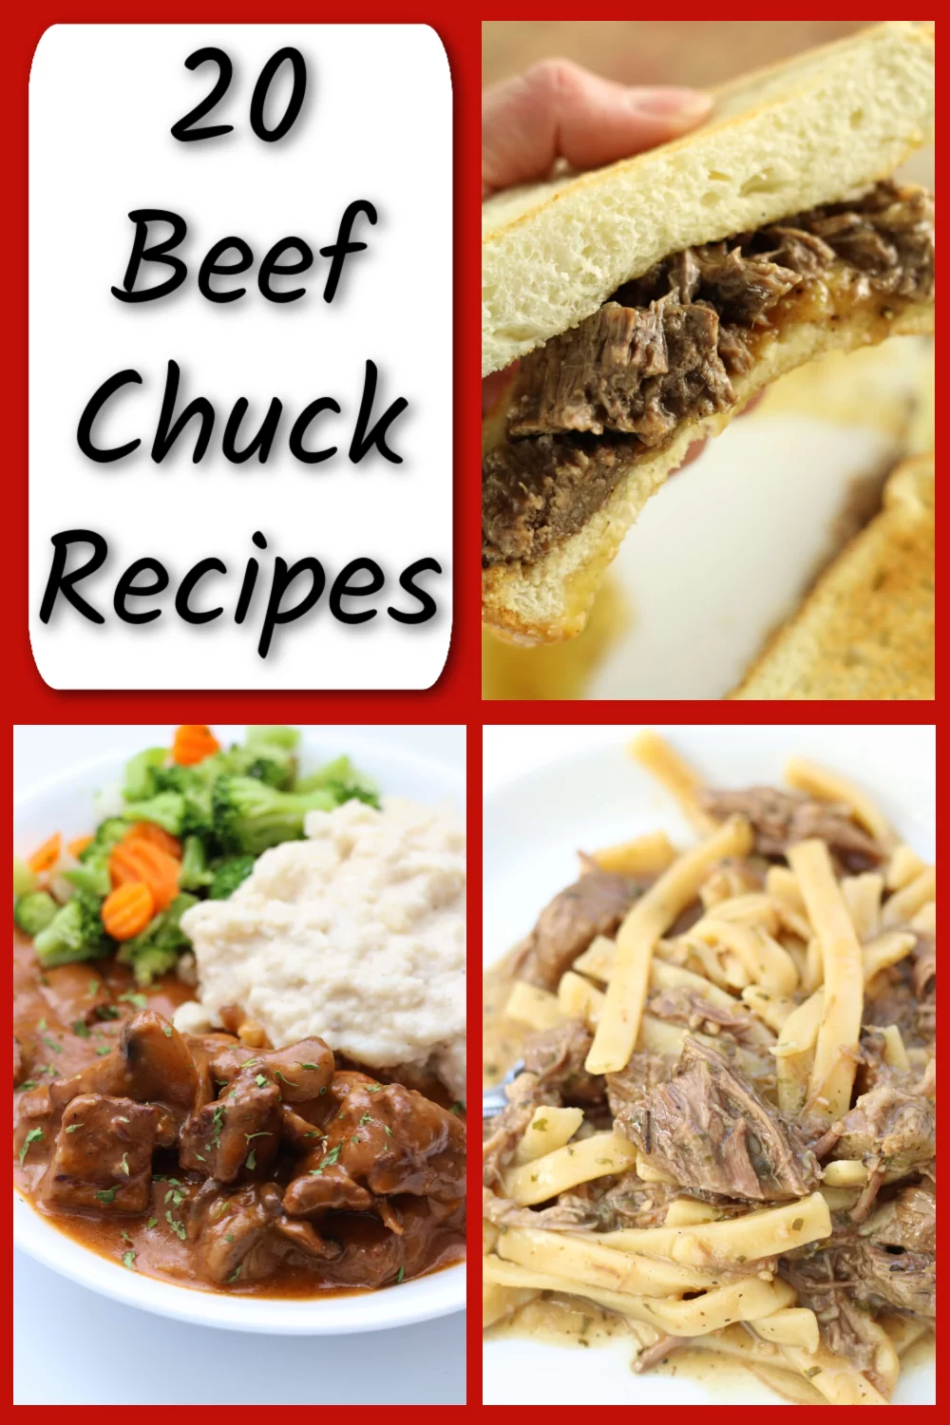 Something different to do with chuck roast – 365 Days of Slow Cooking and Pressure Cooking